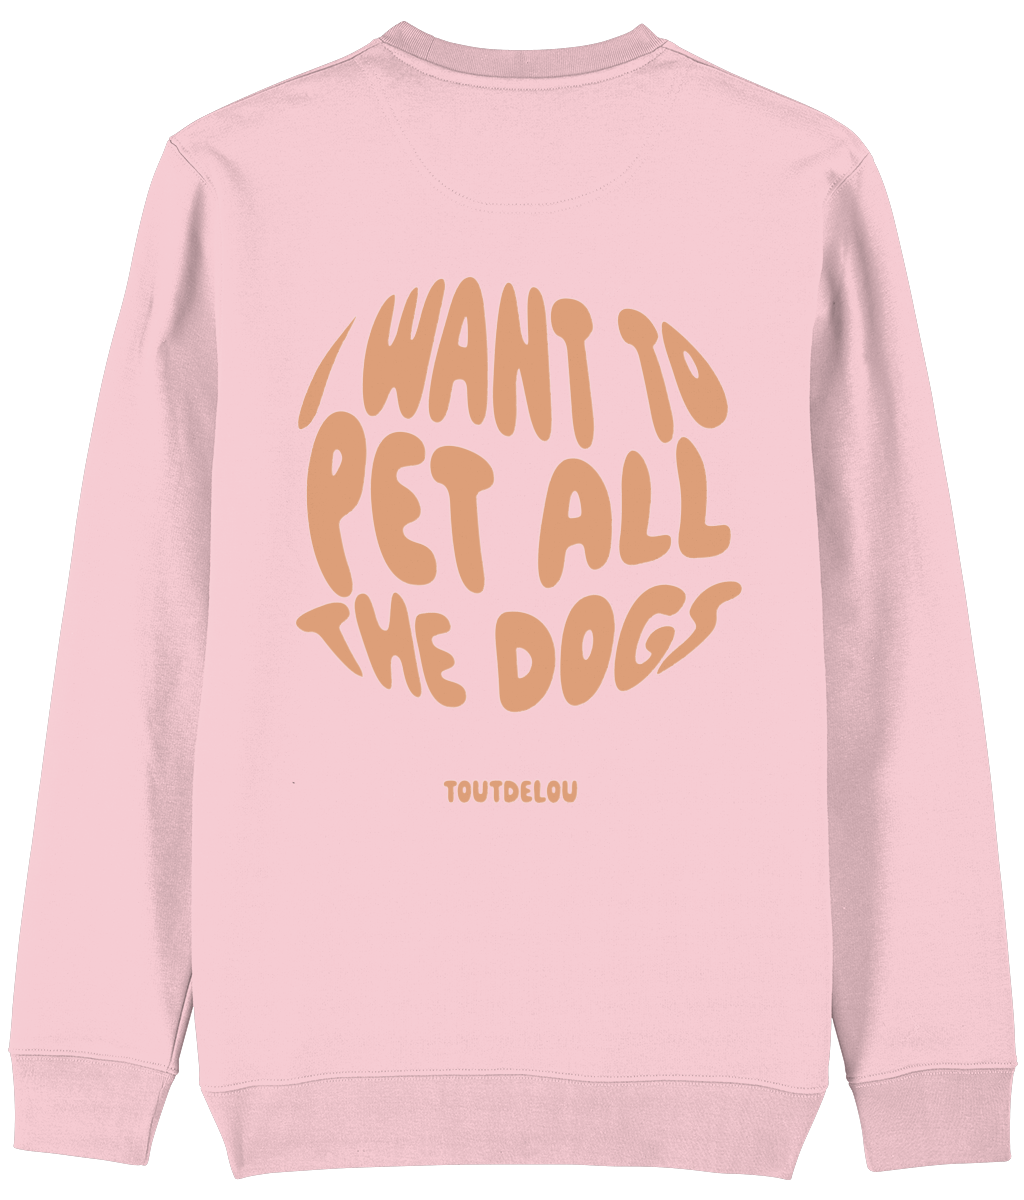 Sweater - pet all the dogs - peach - print on front and back